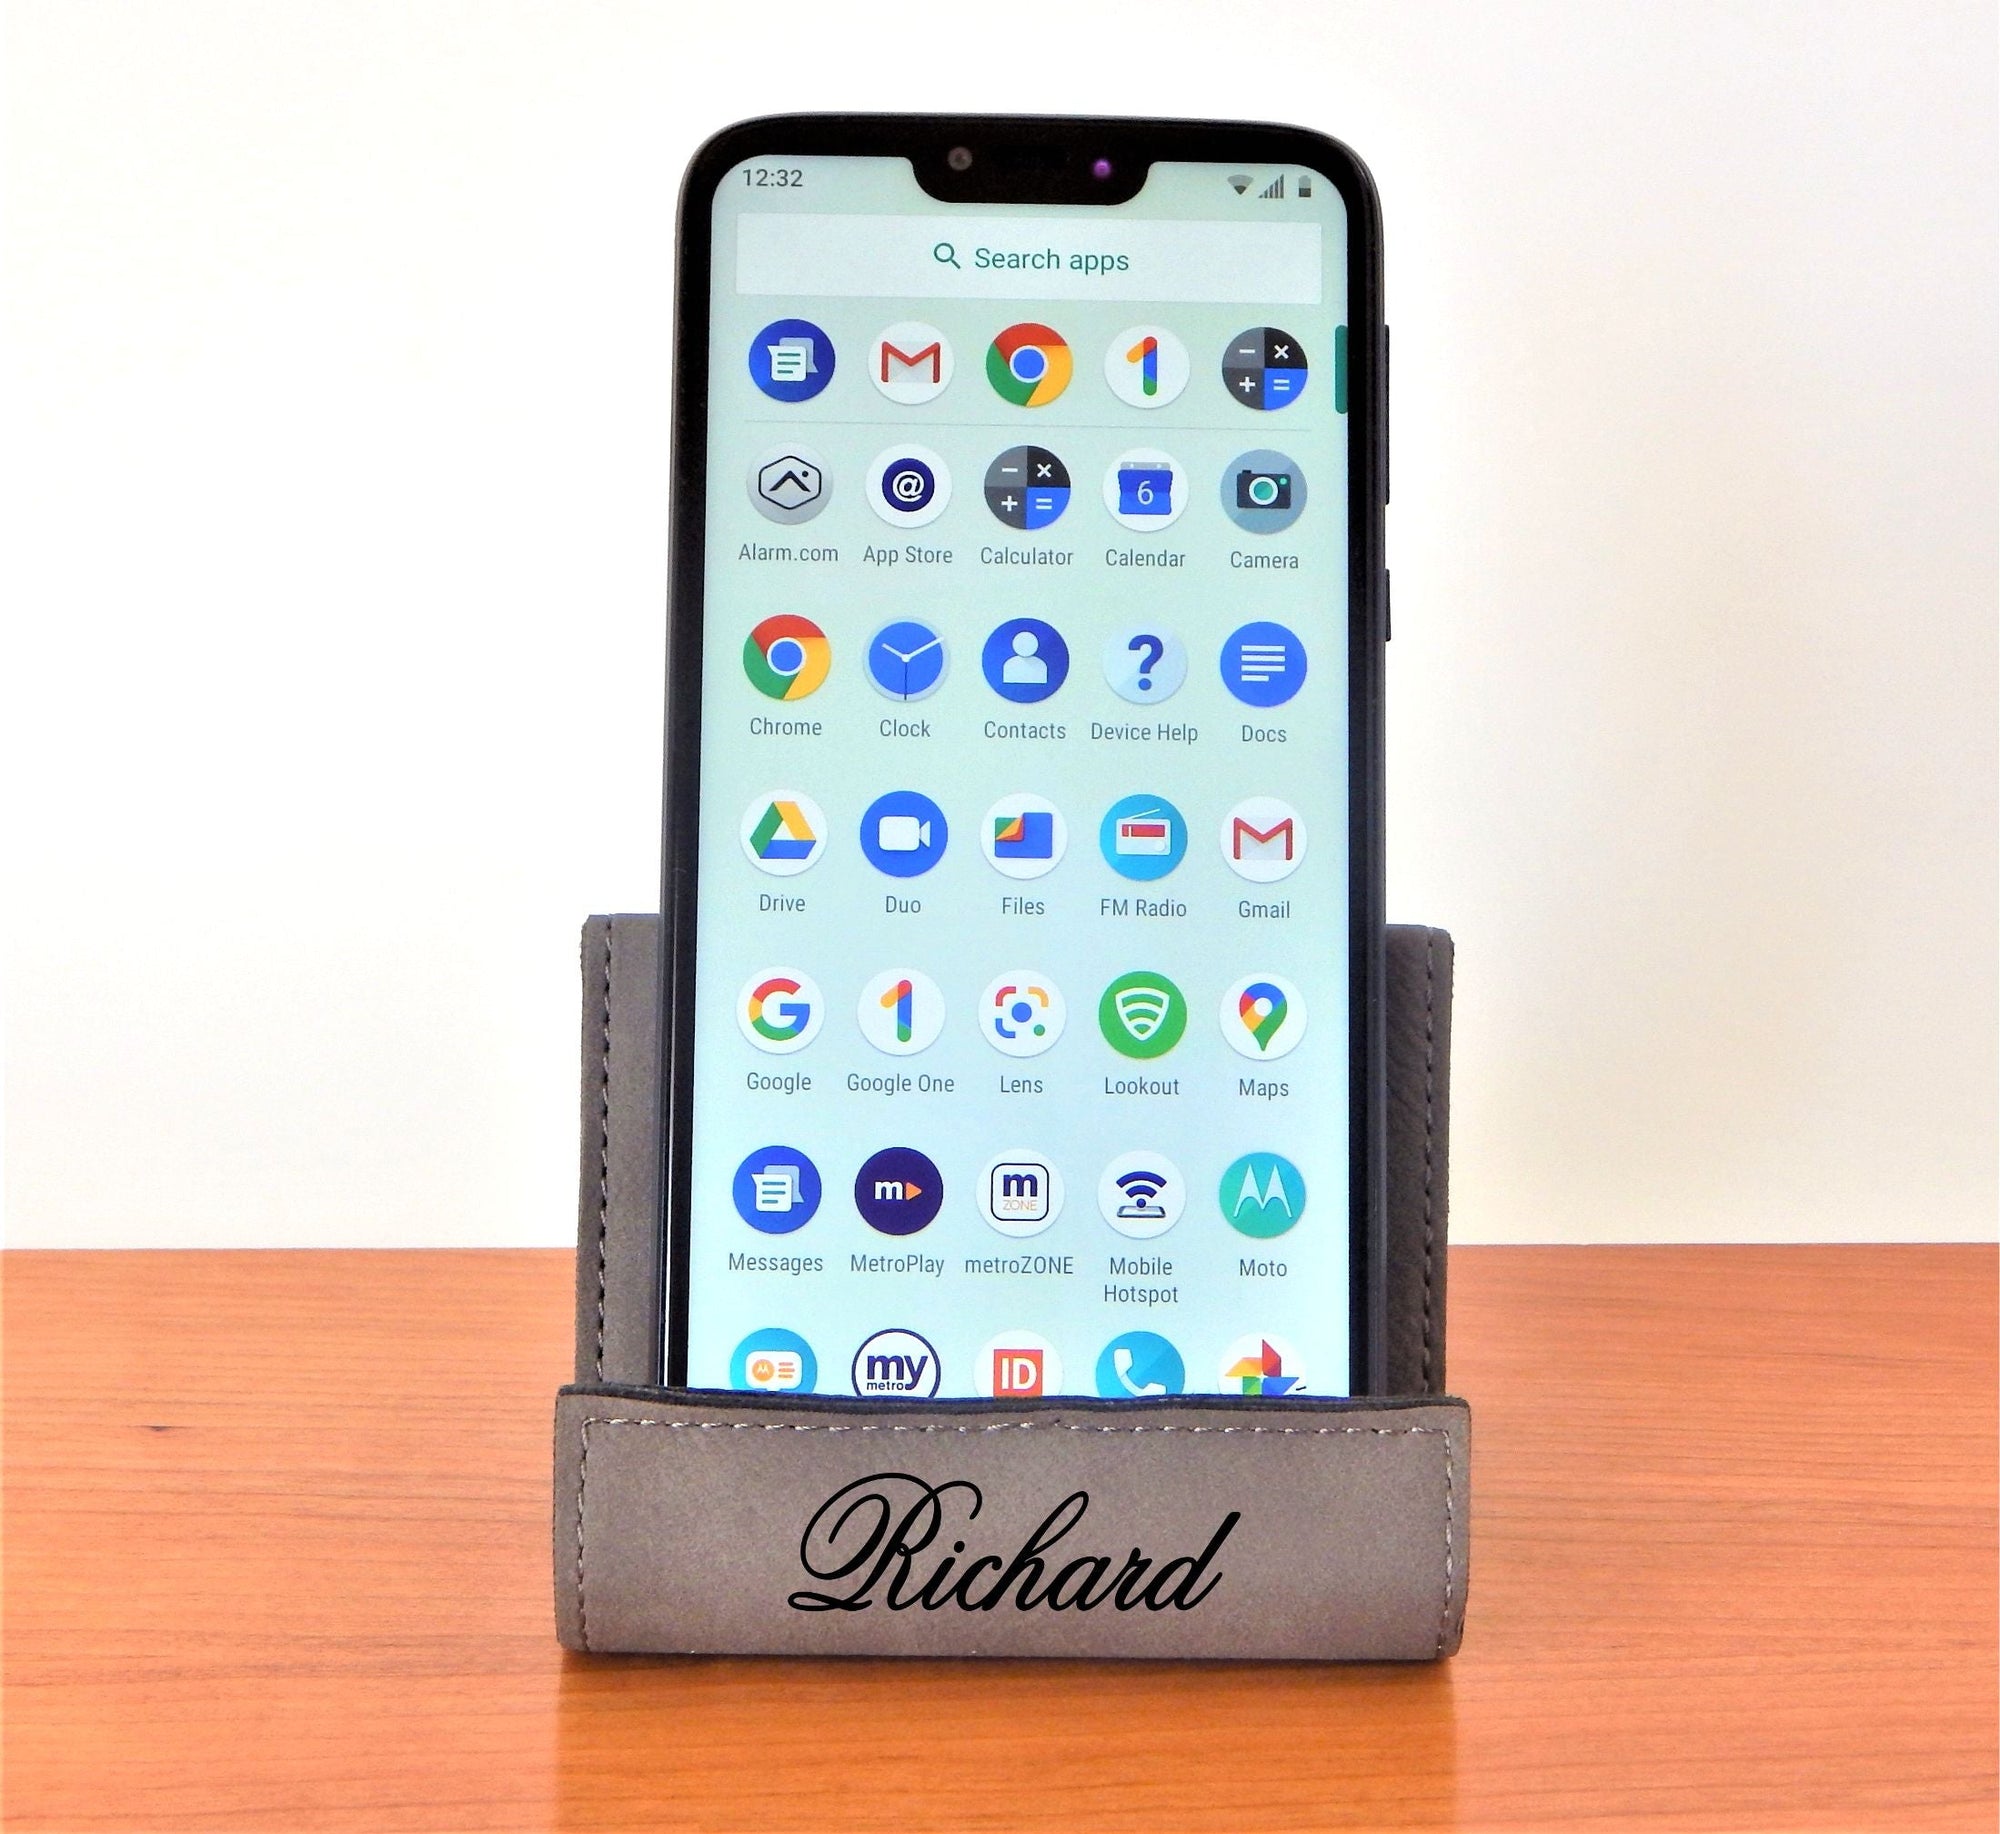 Cell phone Stand for Desk | Custom Tablet Holder | Personalized iPhone Accessories